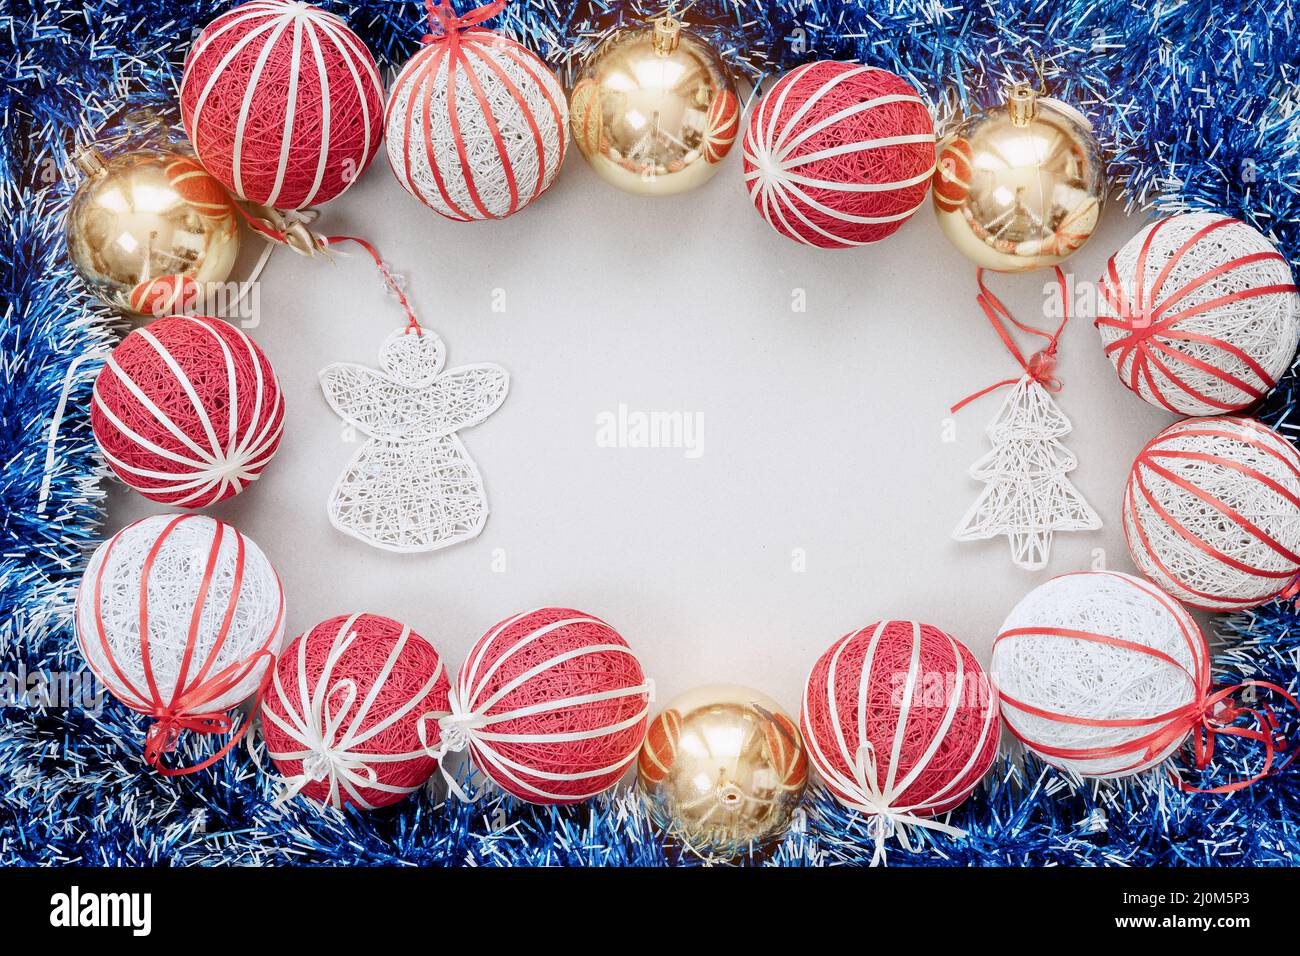 Hand-made Christmas tree decorations and blue tinsel around are laid out on a white background. Top view Stock Photo